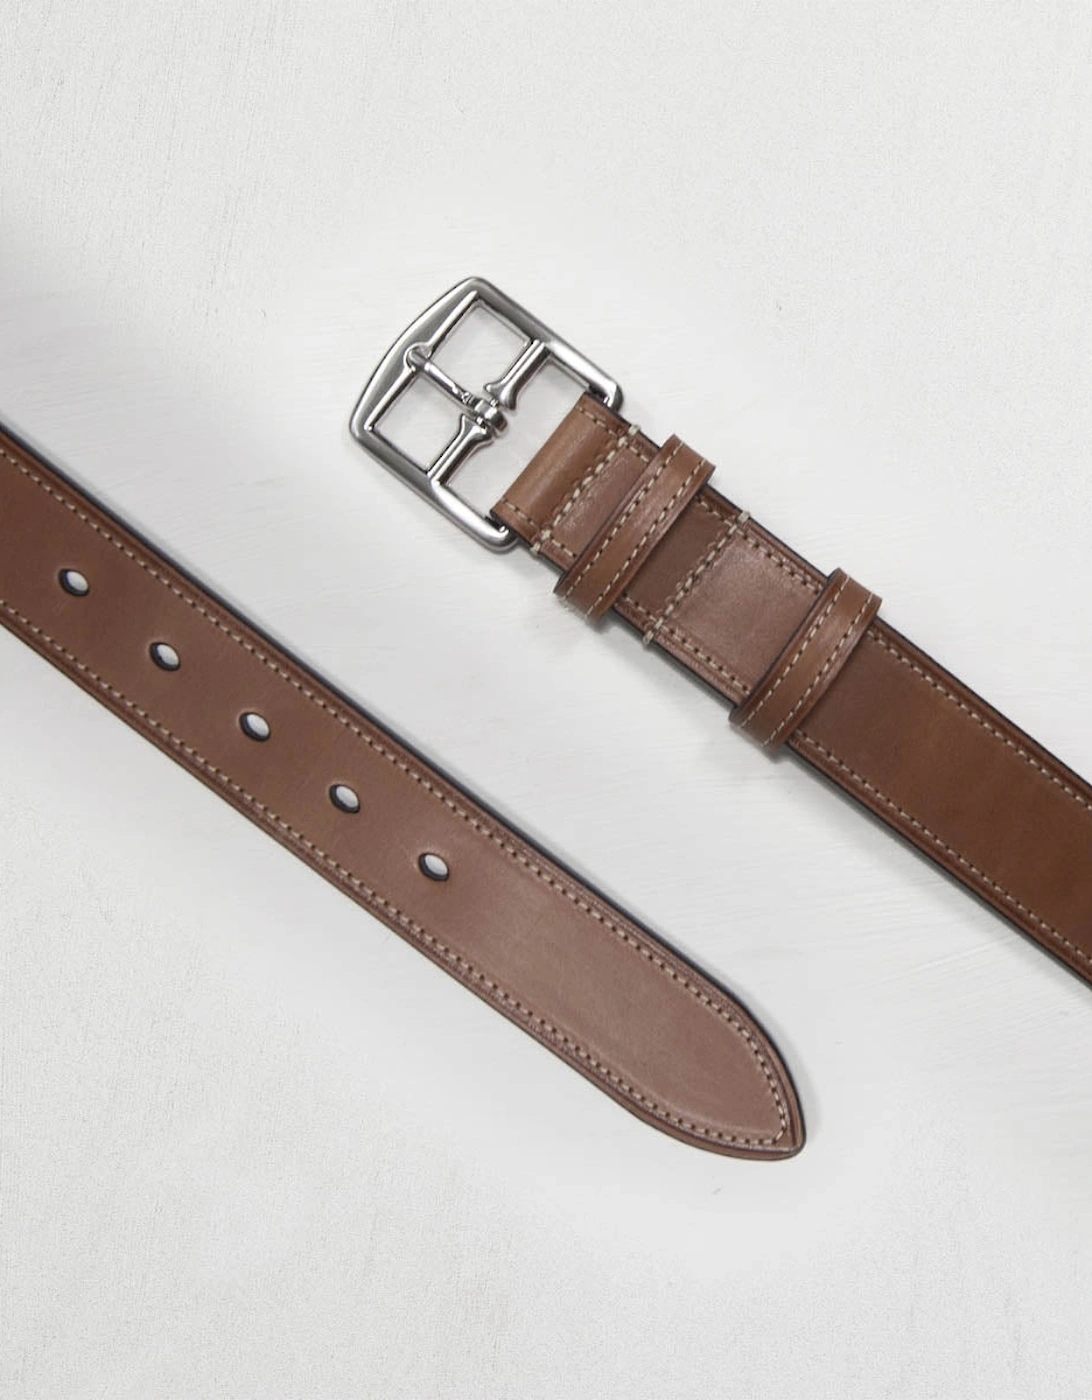 Andersons Classic Leather Bridle Stitched Belt - Tan 3.5cm